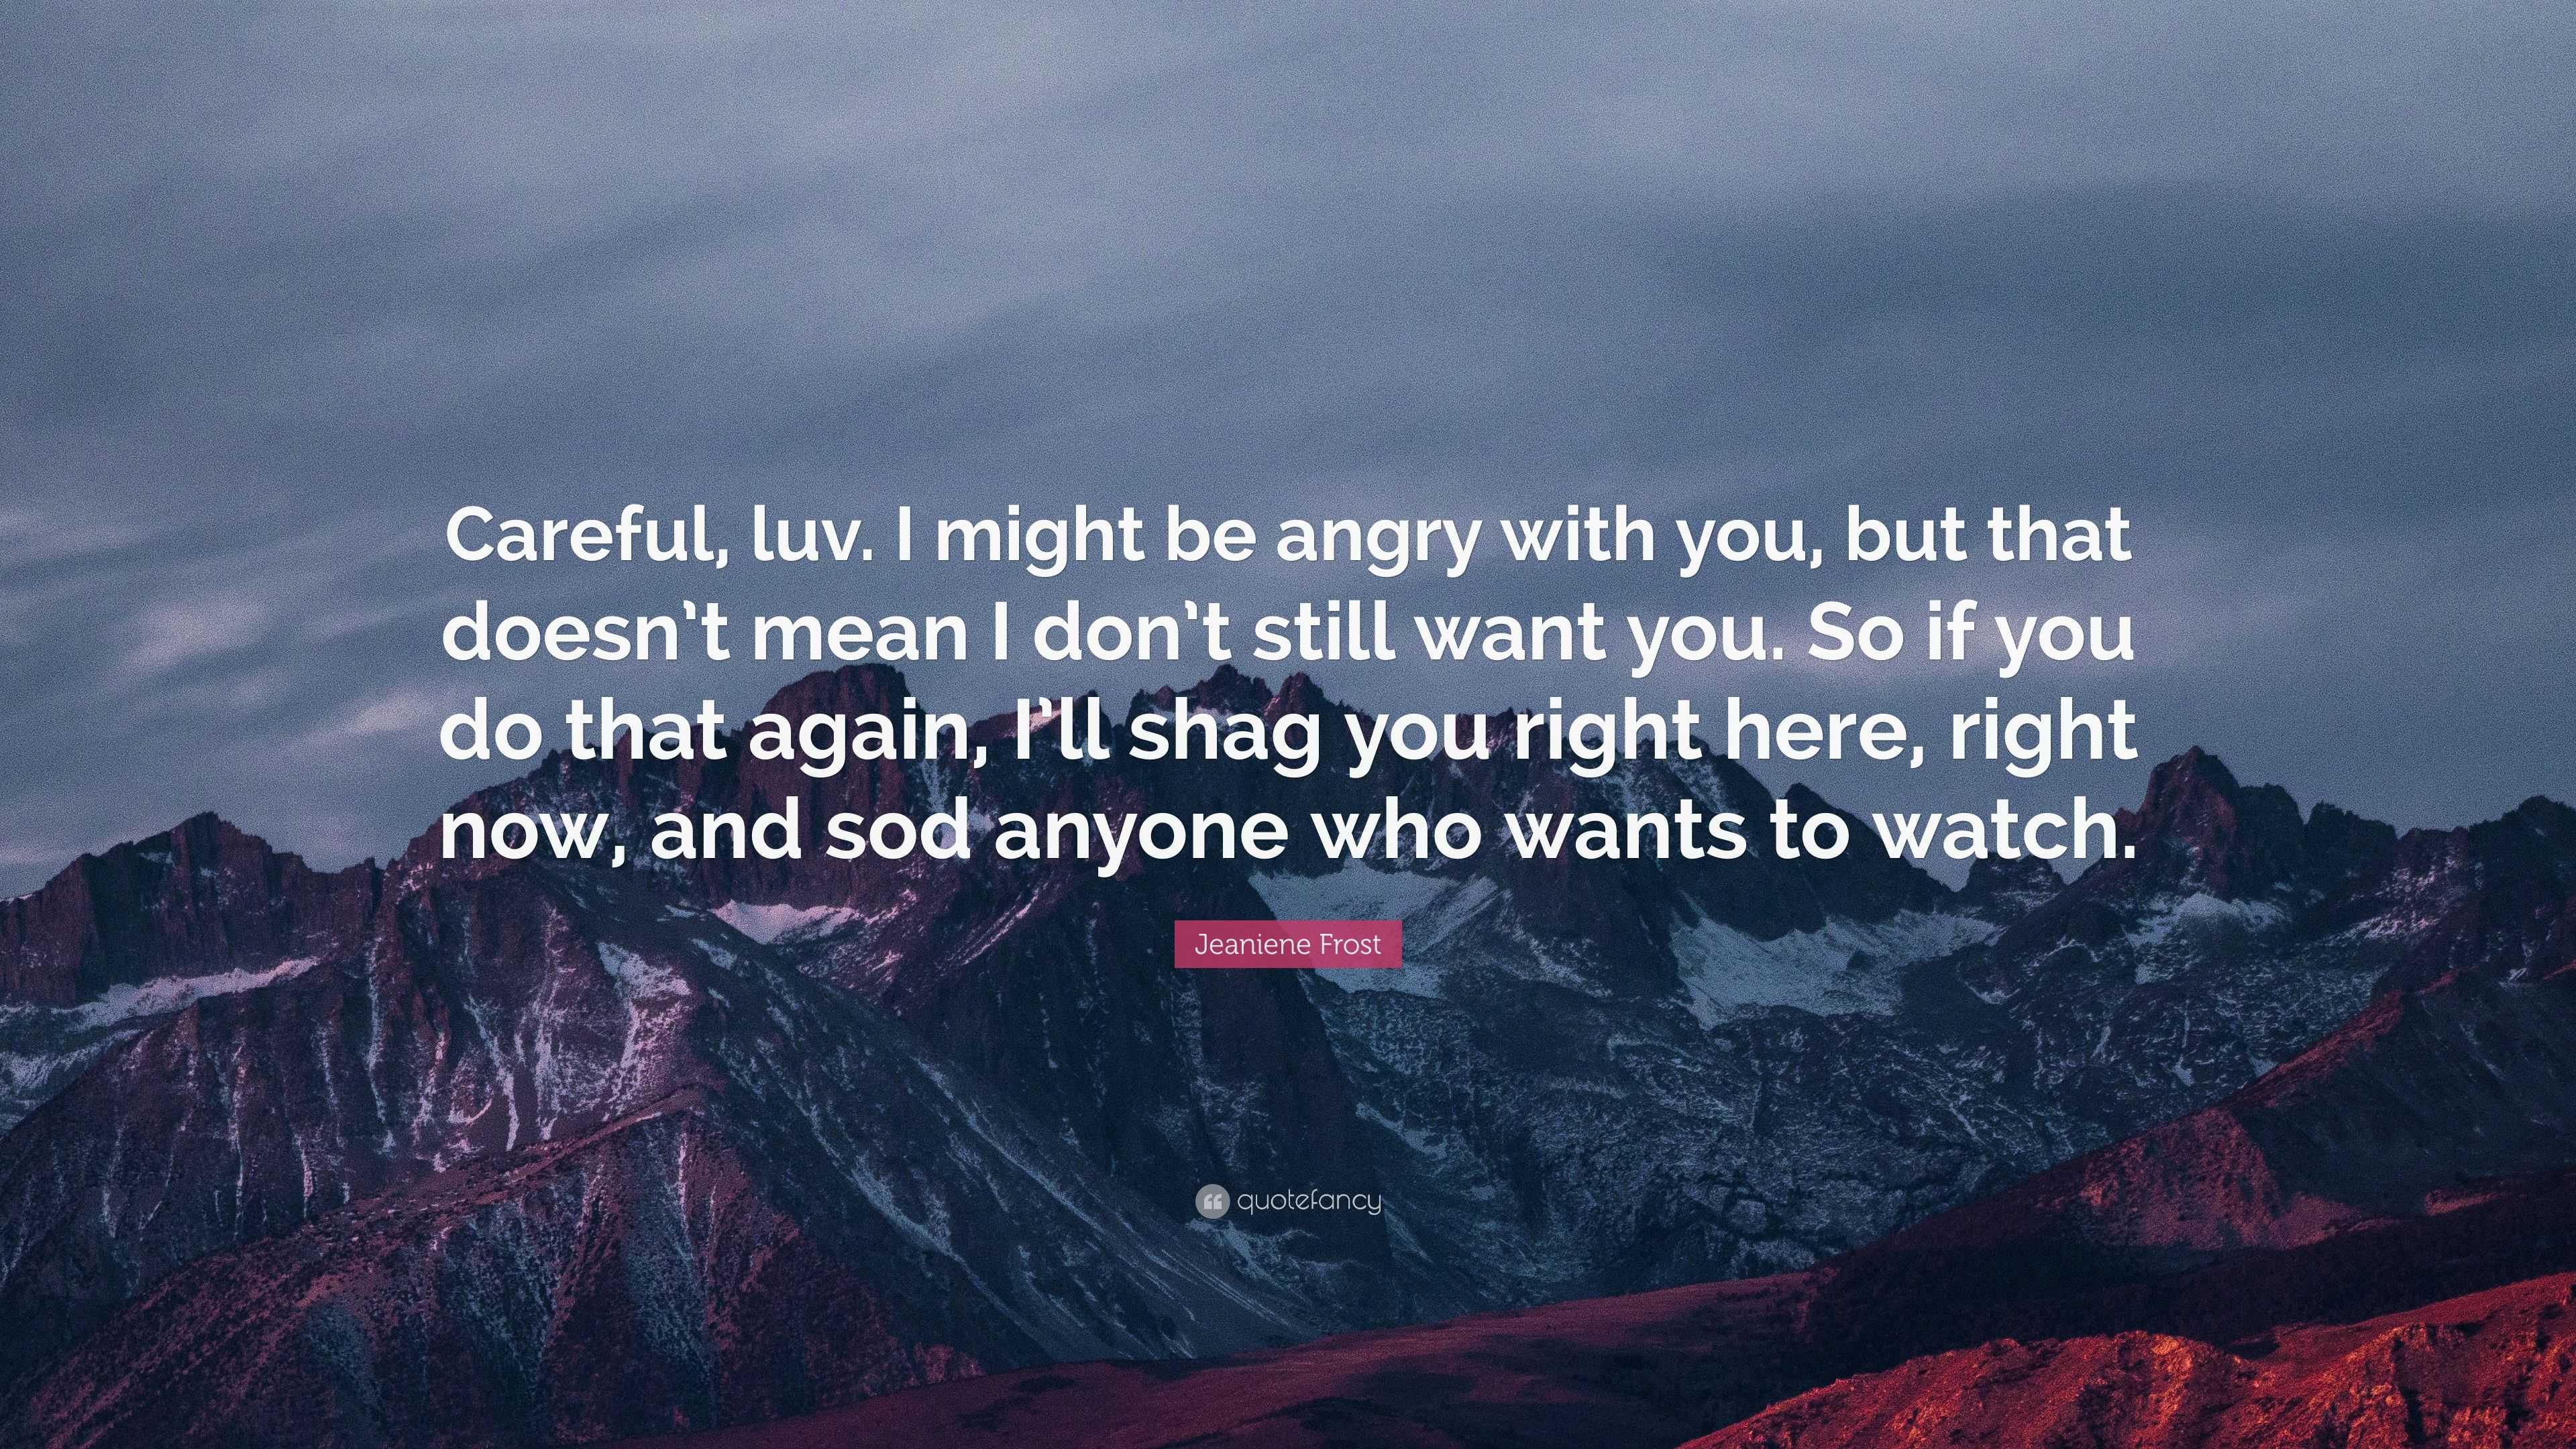 Jeaniene Frost Quote: “Careful, luv. I might be angry with you, but ...